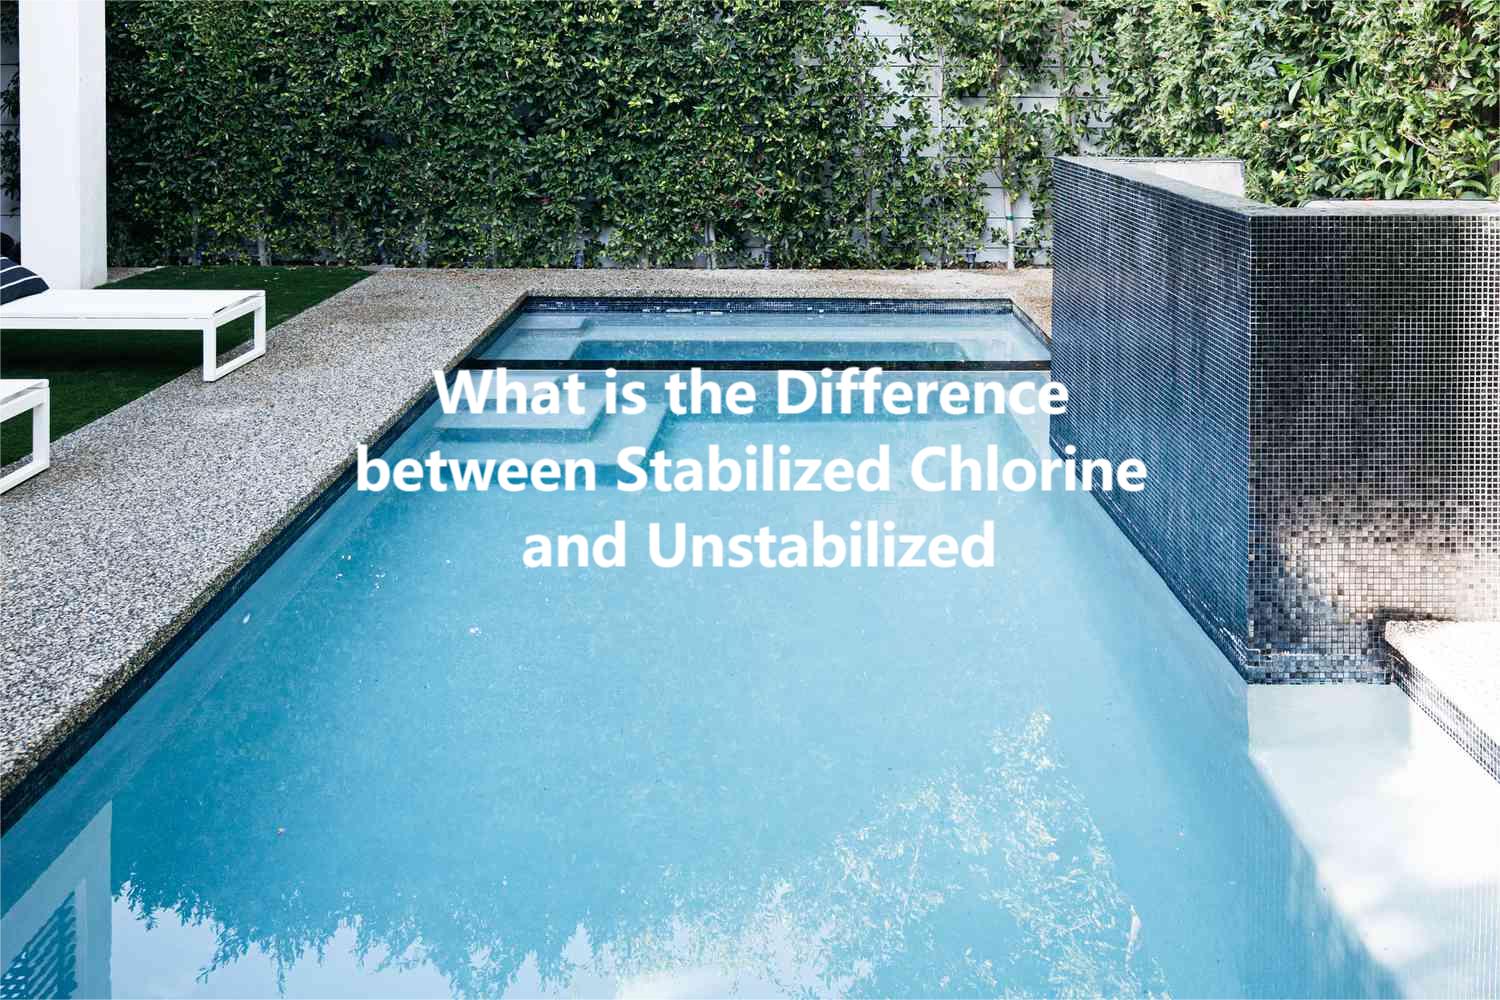 What is the Difference between Stabilized Chlorine and Unstabilized？